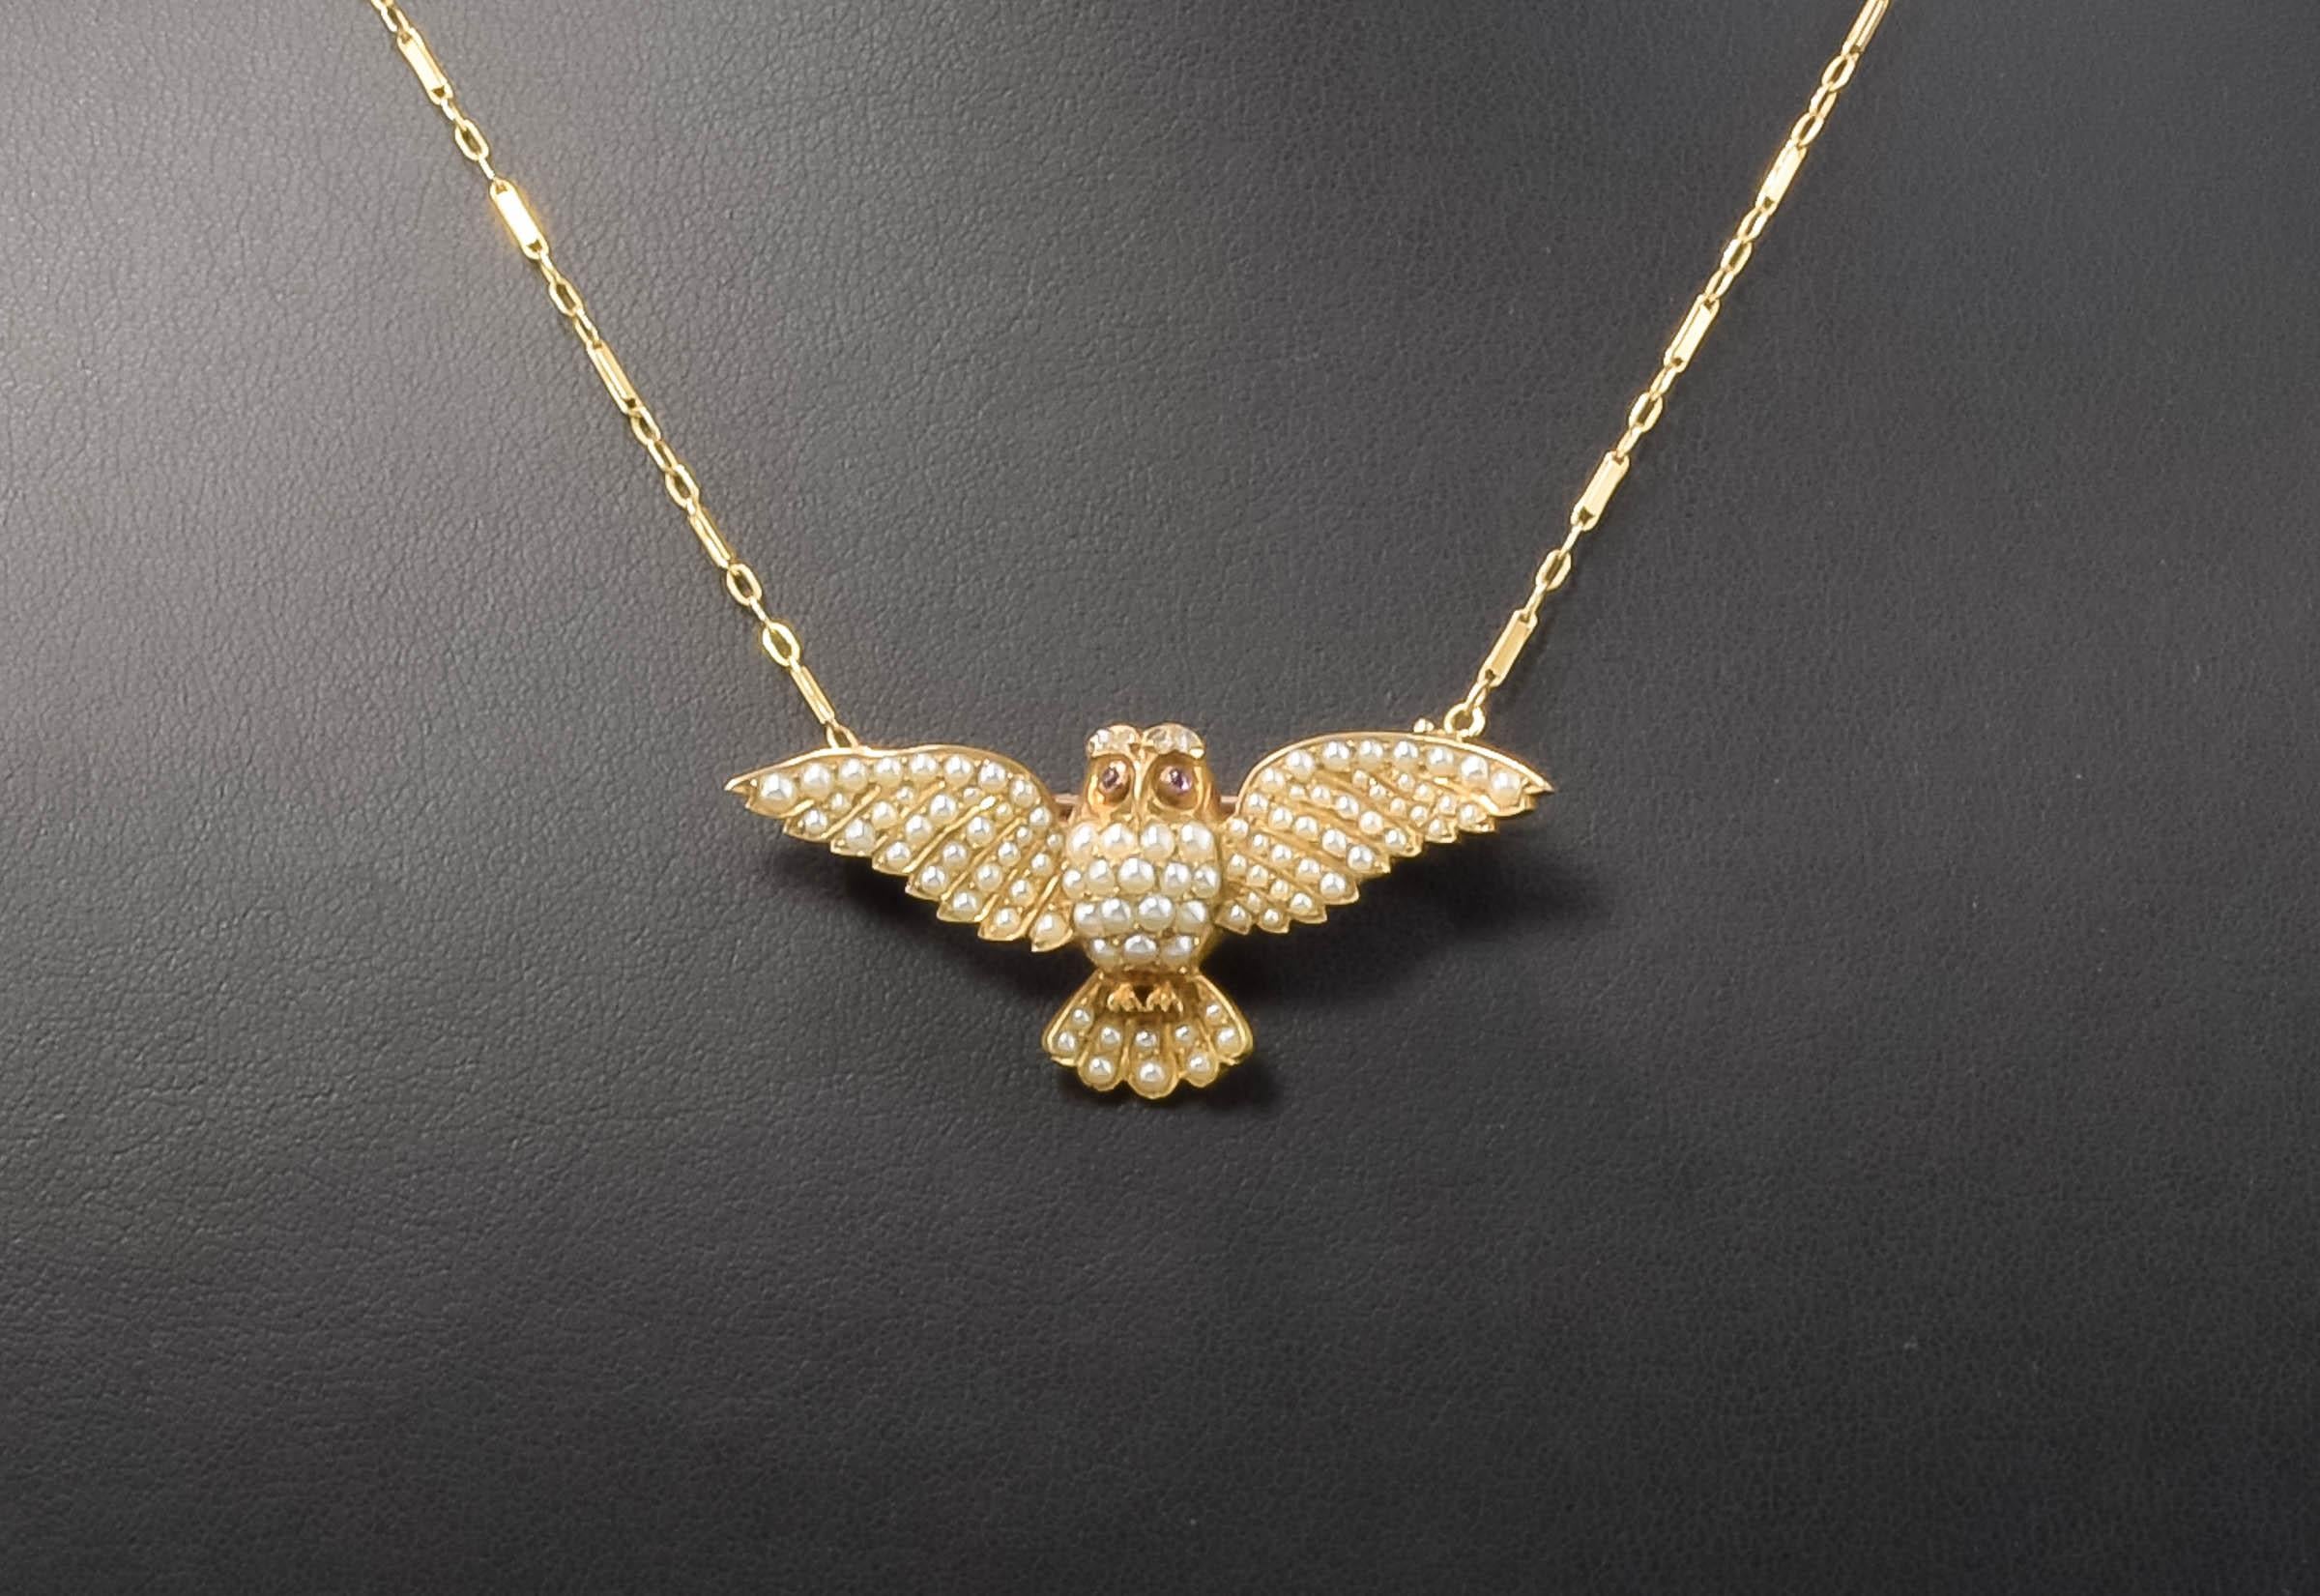 Antique Flying Owl Brooch Pin with Diamond & Pearls In Good Condition For Sale In Danvers, MA